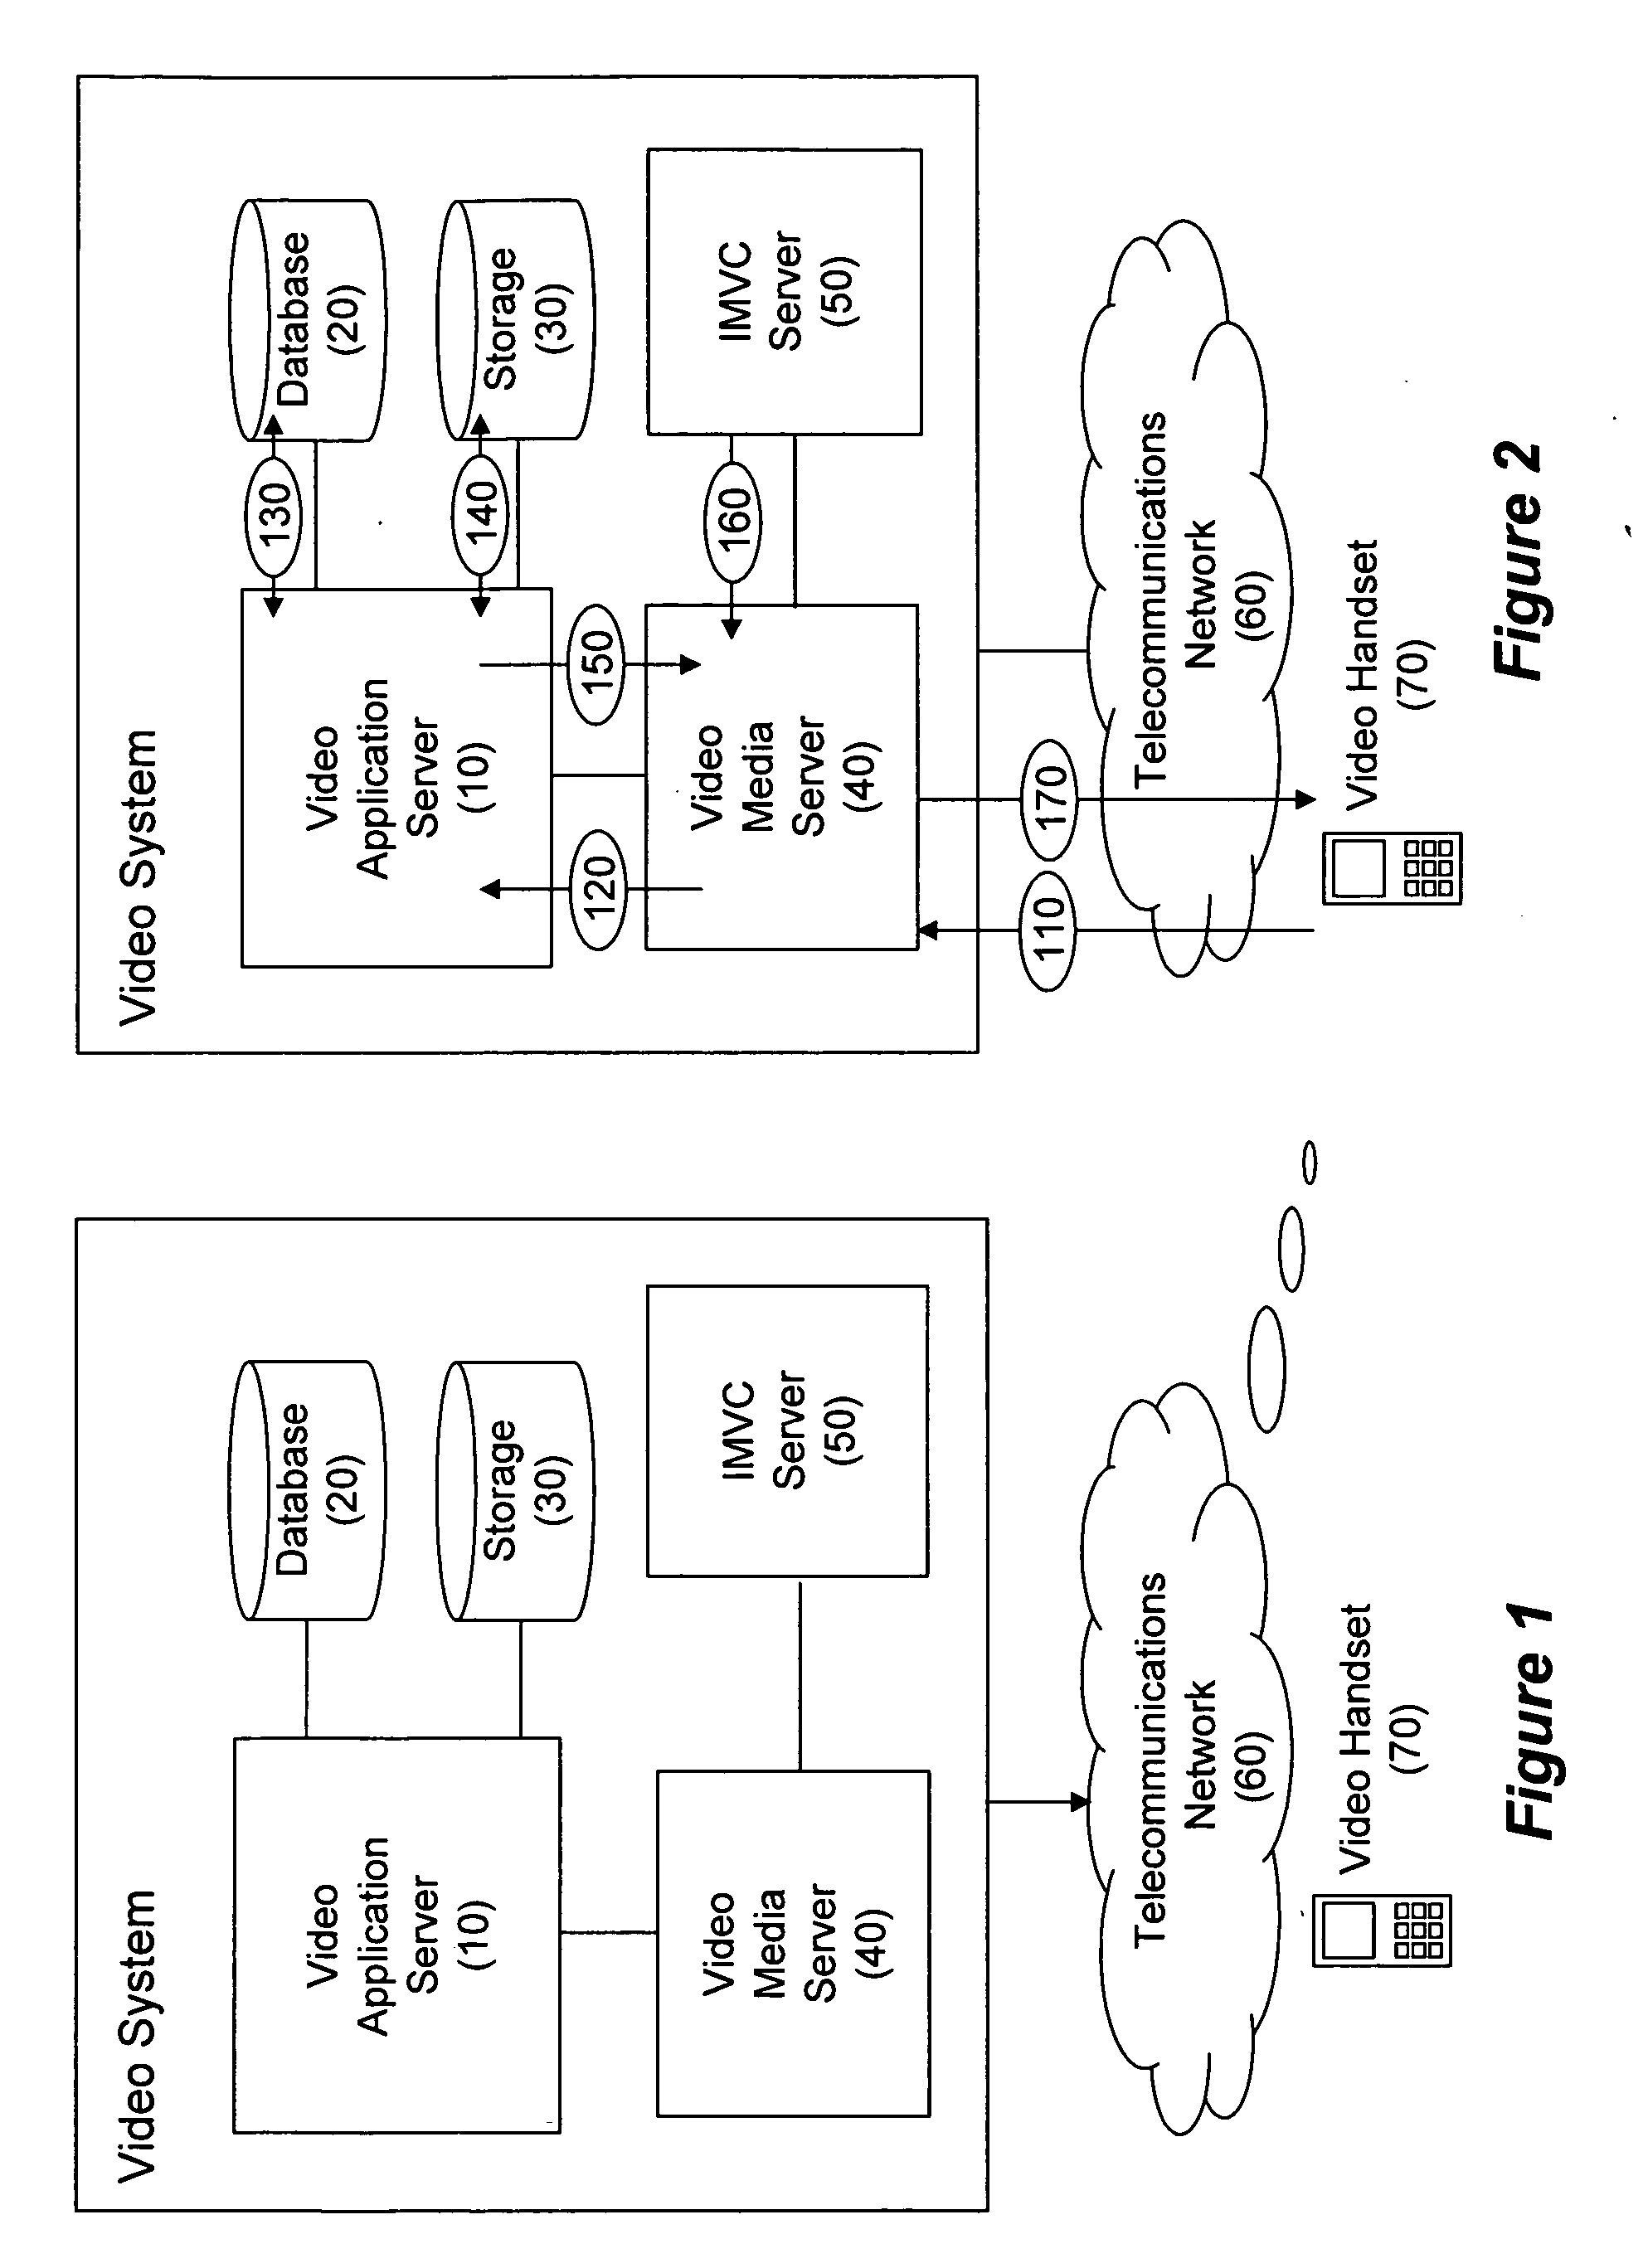 System and method for multimedia-to-video conversion to enhance real-time mobile video services